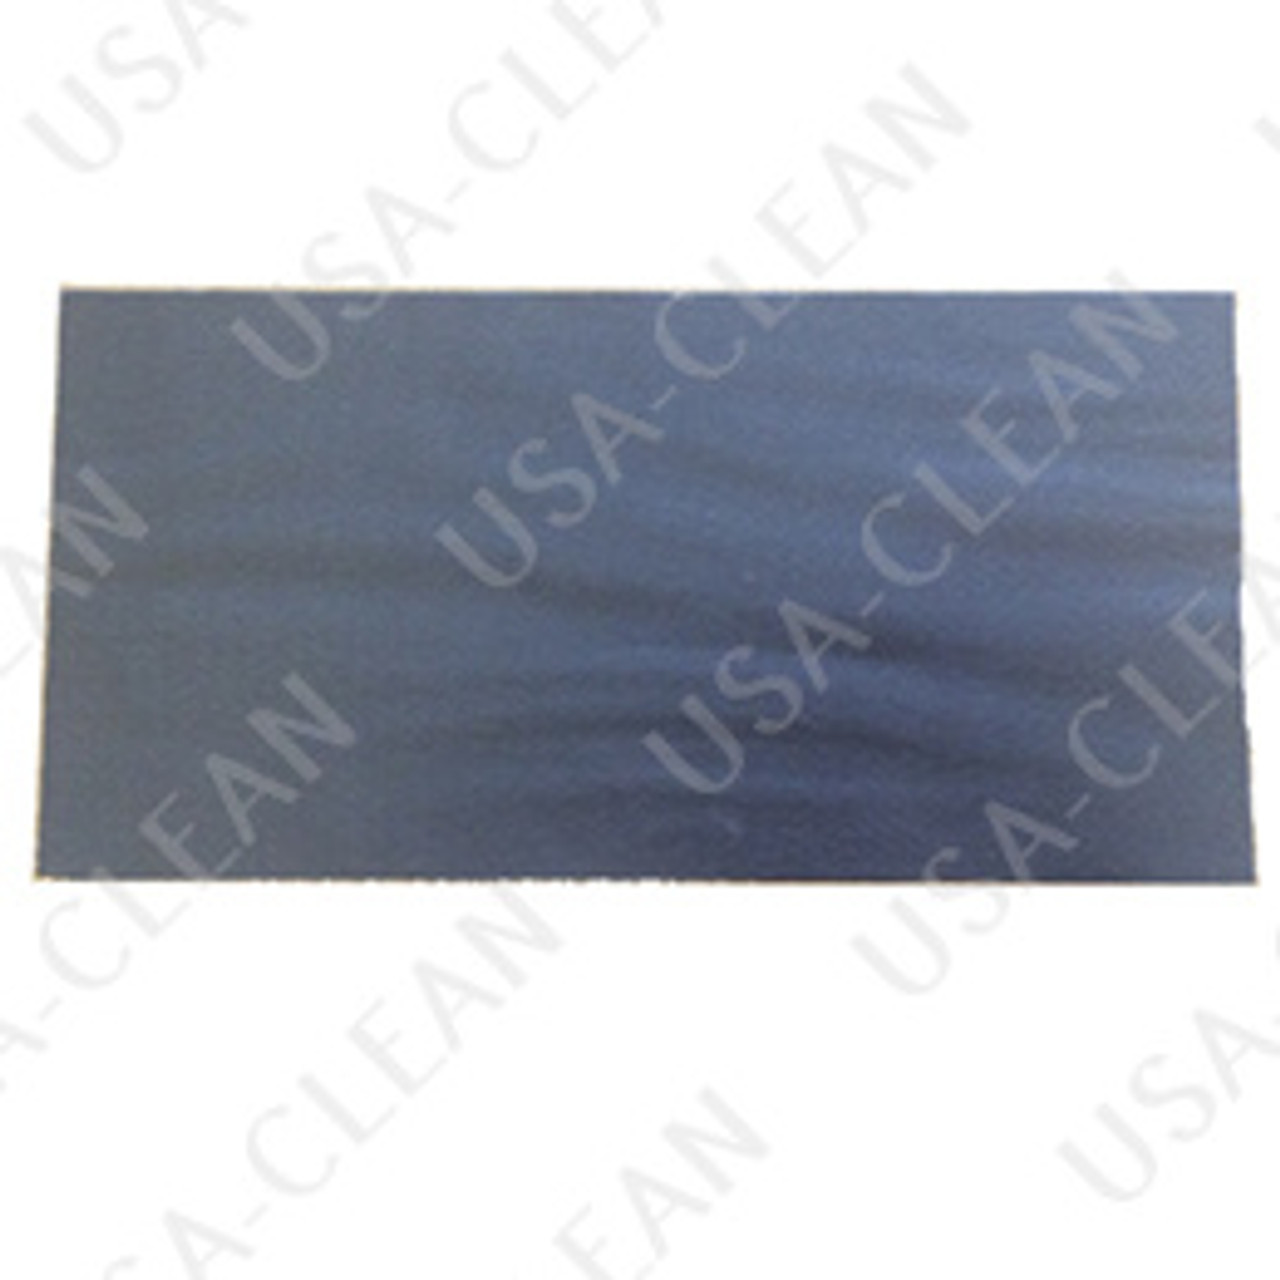 Two sided velcro 14 x 28 inch 270-0753 – Ships Fast from Our Huge Inventory